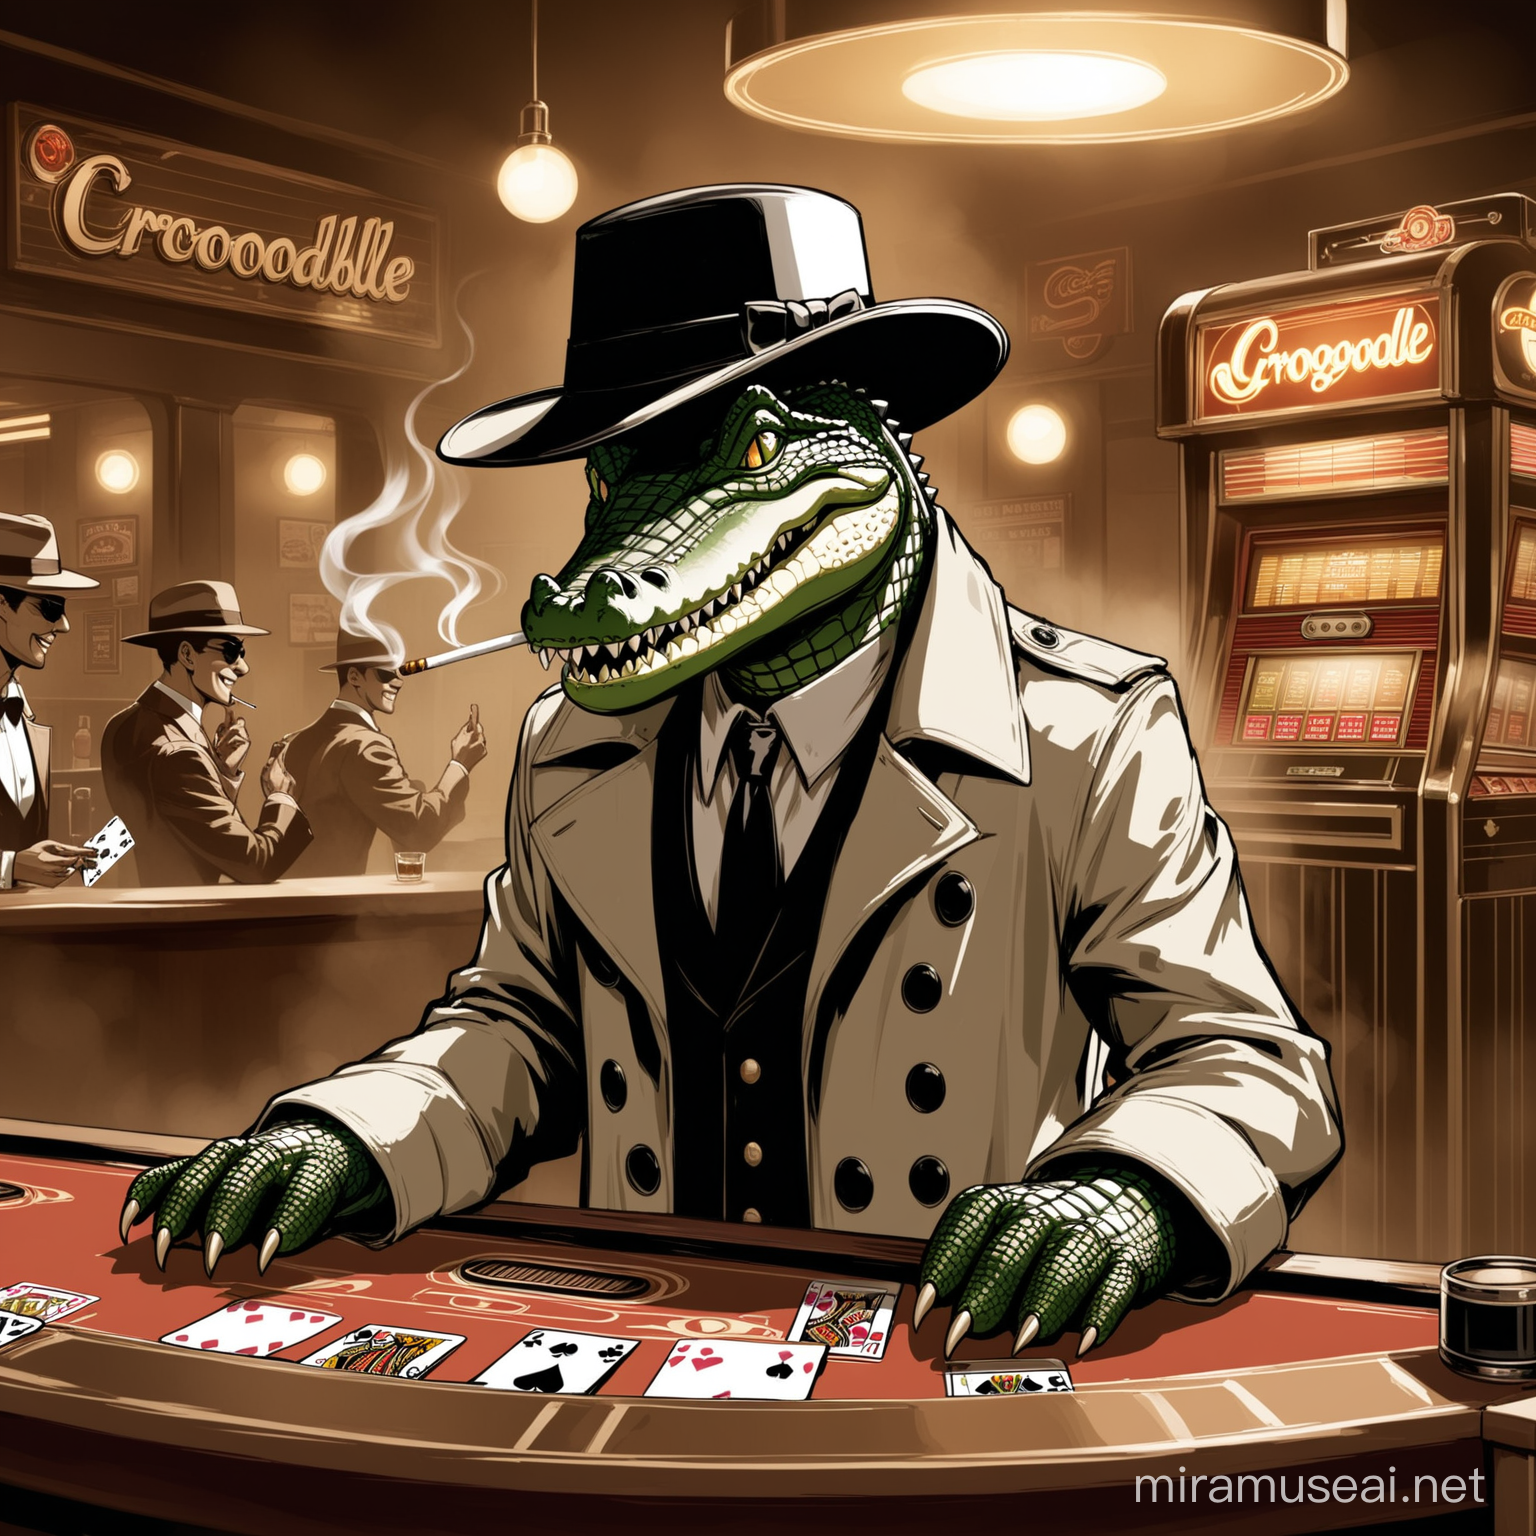 Crocodile - Gangster playing cards(noir) group
appreance- crocodile humanoid leaning over table /smiling/grey/black/white trench coat/ fidora hat/smoking
background-hazy brown/ bar/ jukebox/